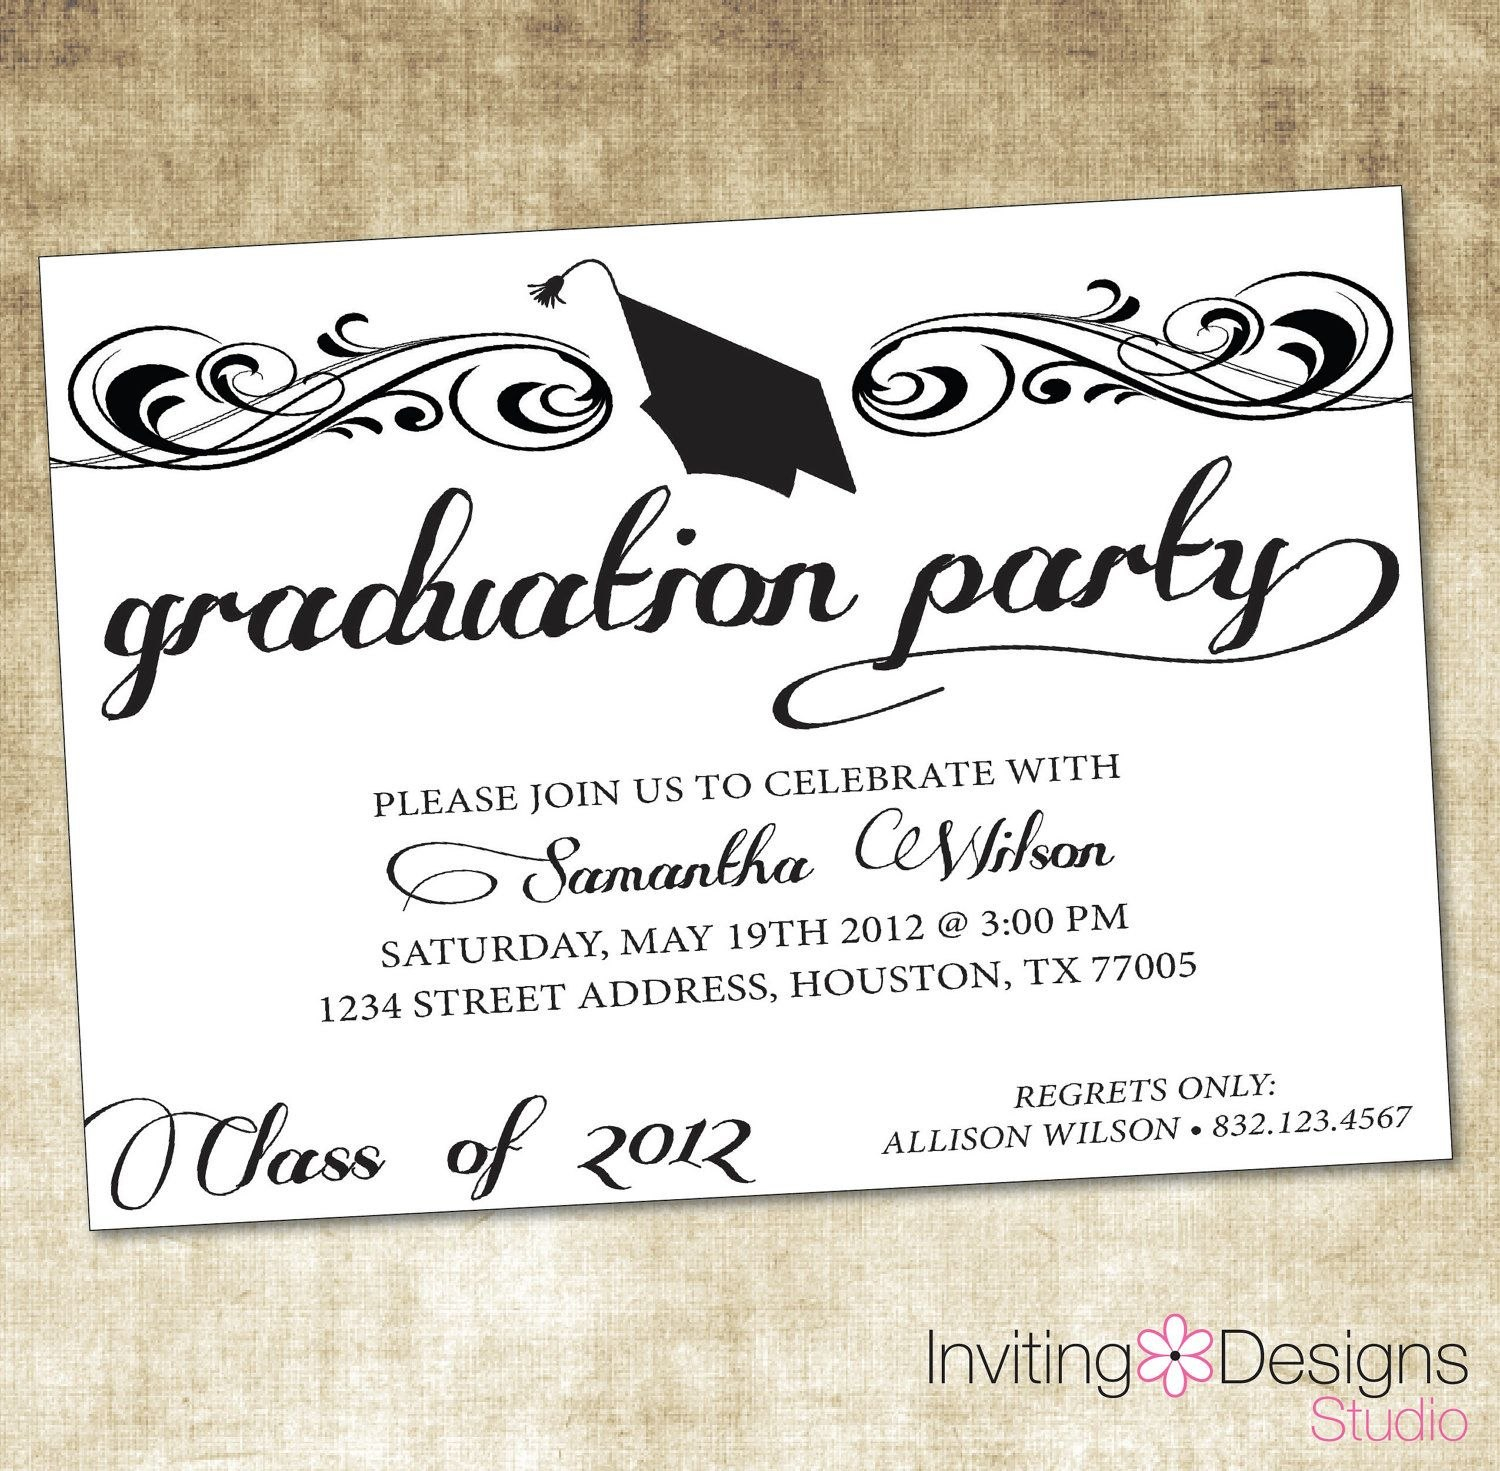 Graduate Invites Glamorous Grad Party Invites To Design Party within Graduation Party Invitation Templates Free Word